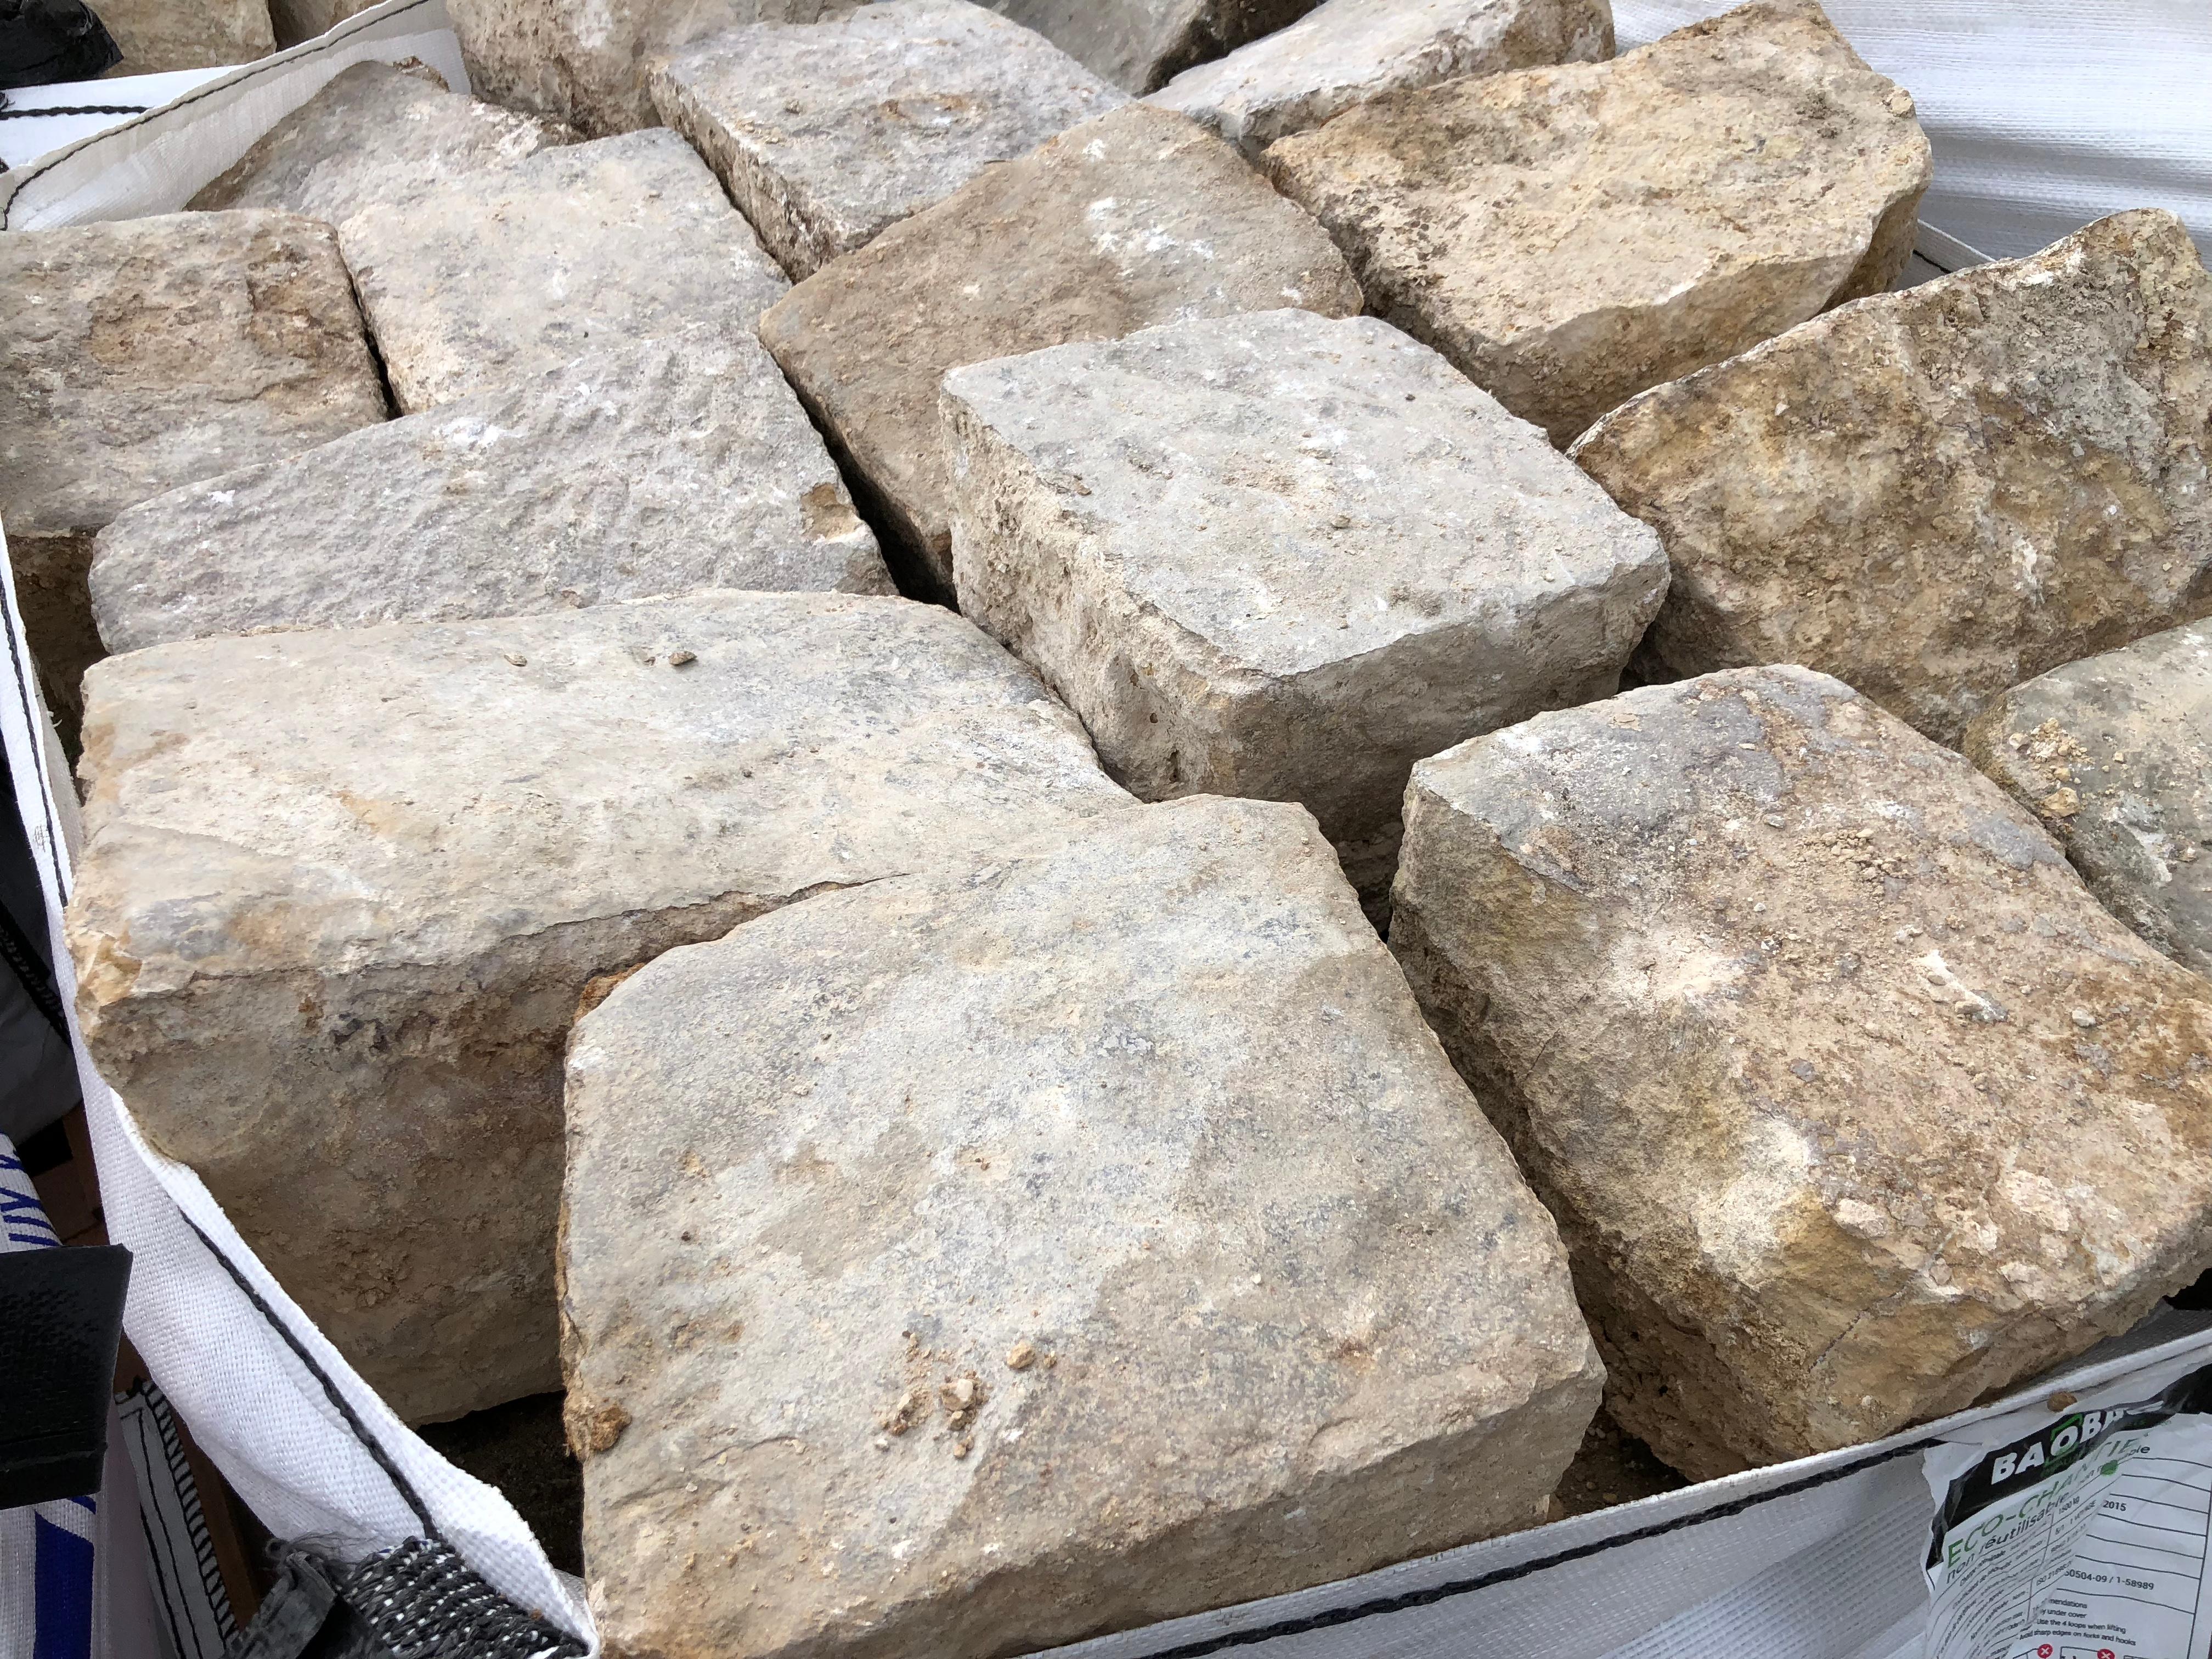 French antique cobble stone 17th century, original from France.
Very large dimensions pieces, solid French antique floor from France (authentic 17th century). Price per square foot. Ready for installation, available right now.
More info on demand.
